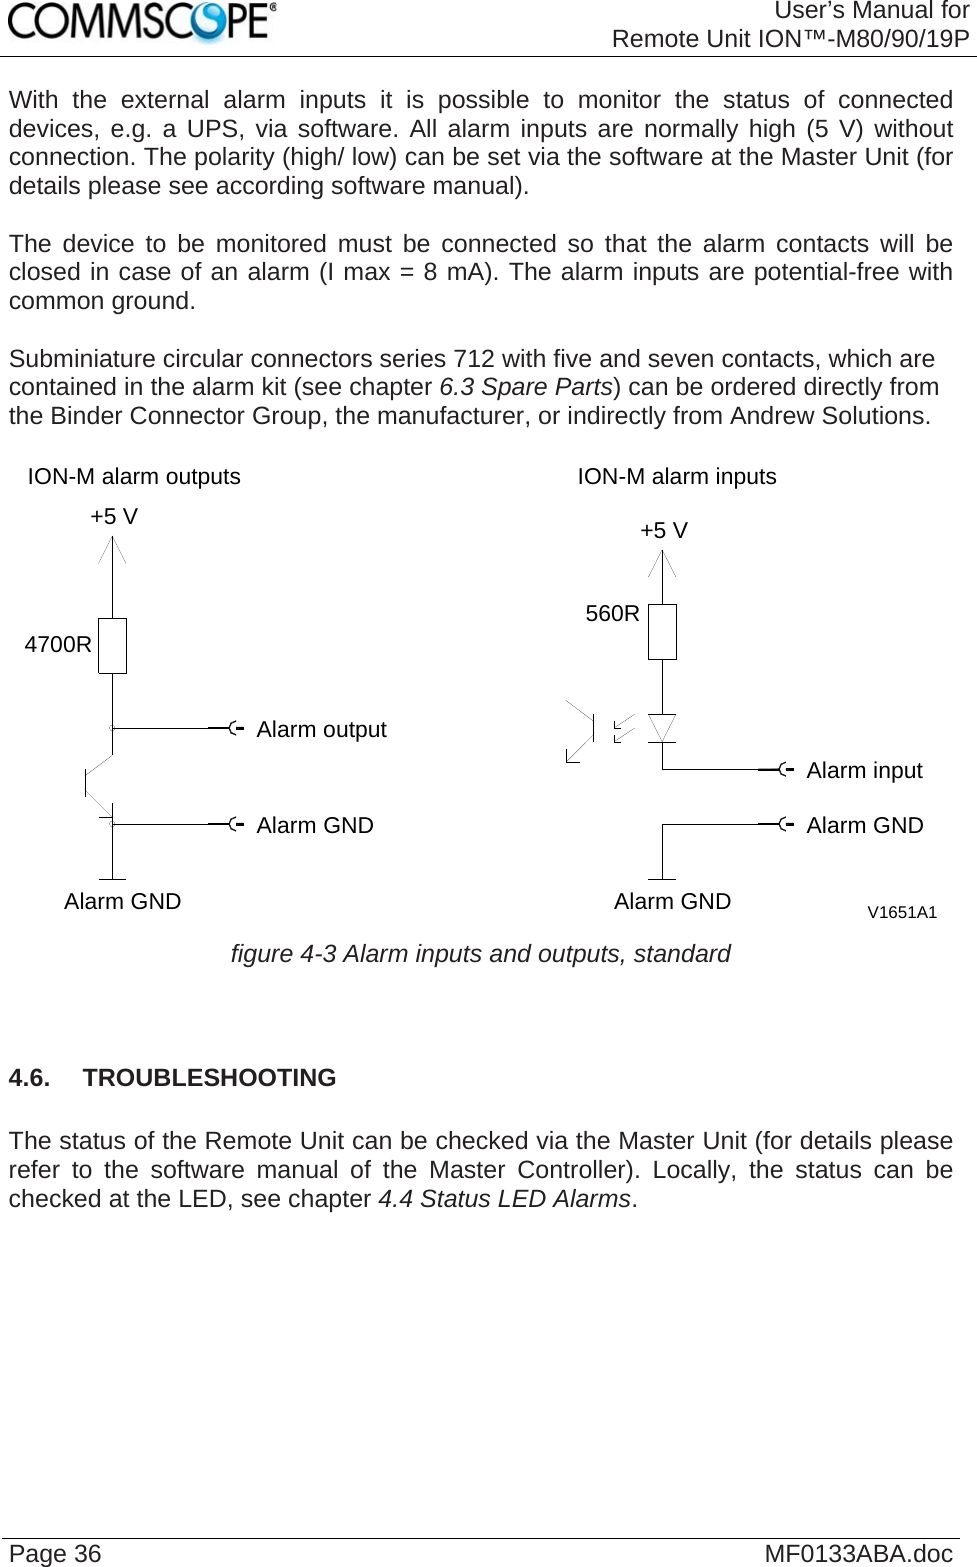 User’s Manual forRemote Unit ION™-M80/90/19P Page 36  MF0133ABA.docWith the external alarm inputs it is possible to monitor the status of connected devices, e.g. a UPS, via software. All alarm inputs are normally high (5 V) without connection. The polarity (high/ low) can be set via the software at the Master Unit (for details please see according software manual).  The device to be monitored must be connected so that the alarm contacts will be closed in case of an alarm (I max = 8 mA). The alarm inputs are potential-free with common ground.  Subminiature circular connectors series 712 with five and seven contacts, which are contained in the alarm kit (see chapter 6.3 Spare Parts) can be ordered directly from the Binder Connector Group, the manufacturer, or indirectly from Andrew Solutions.  V1651A1Alarm outputAlarm GNDAlarm GNDAlarm GNDAlarm GNDAlarm inputION-M alarm outputs4700R+5 VION-M alarm inputs+5 V560R figure 4-3 Alarm inputs and outputs, standard   4.6.  TROUBLESHOOTING  The status of the Remote Unit can be checked via the Master Unit (for details please refer to the software manual of the Master Controller). Locally, the status can be checked at the LED, see chapter 4.4 Status LED Alarms.   